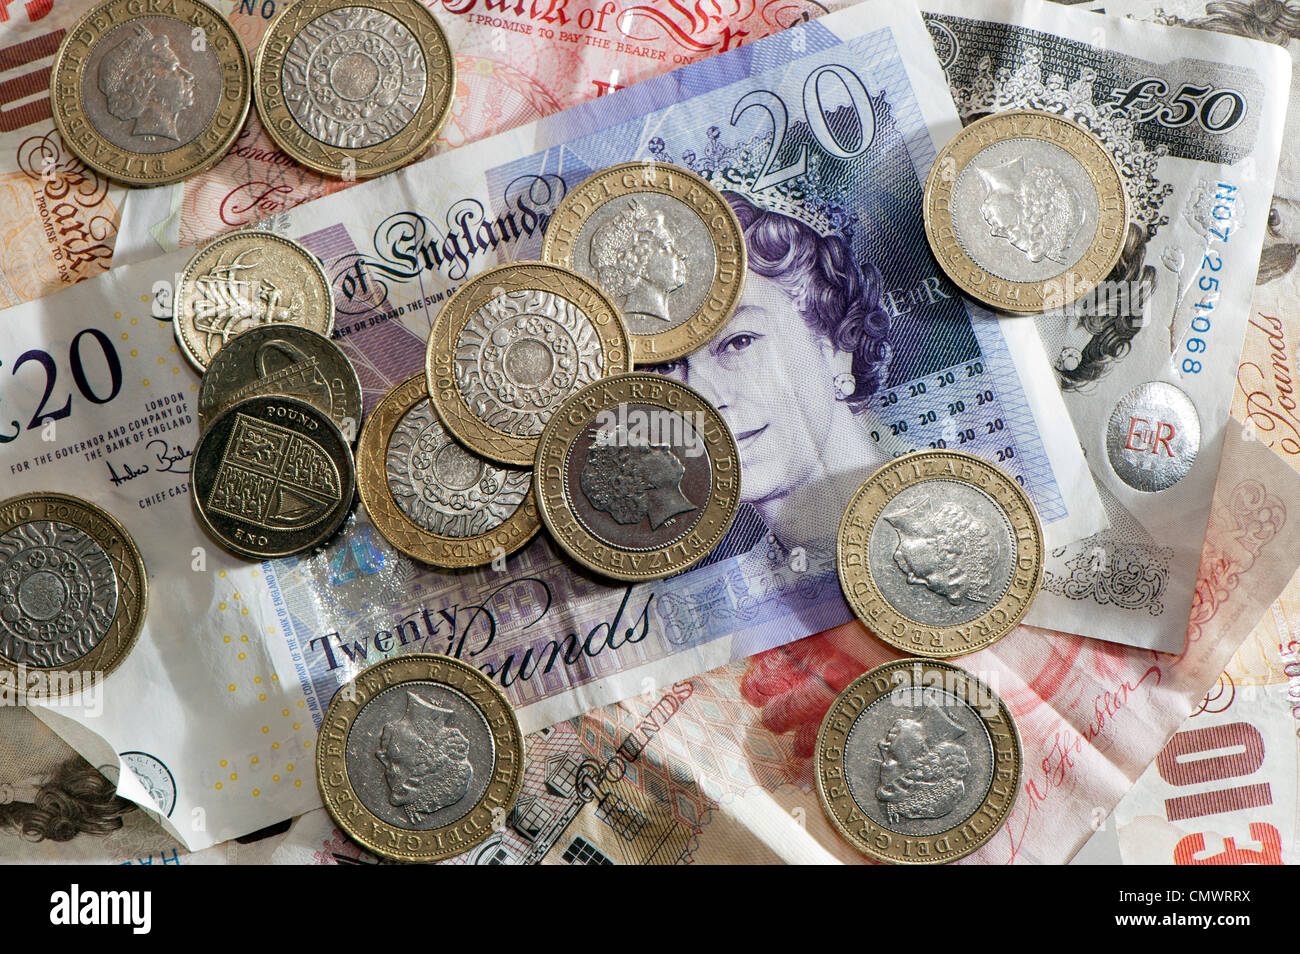 Bank notes and coins of different denominations. British Sterling currency. Stock Photo